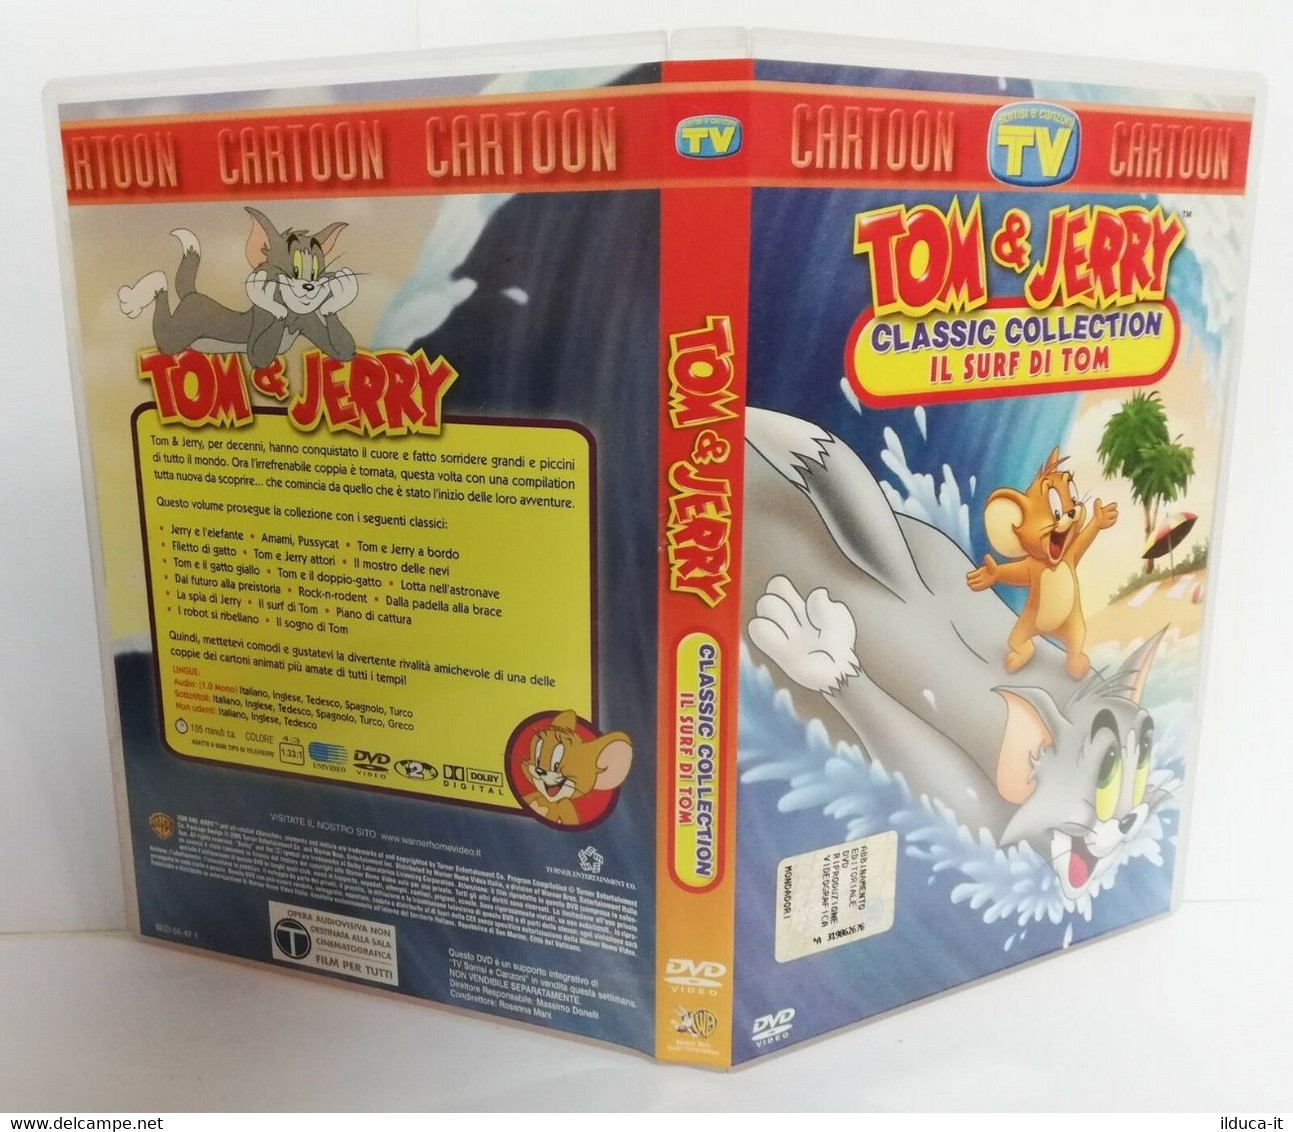 01744 DVD - TOM & JERRY Classic Collection Vol. 12 - Il Surf Di Tom - Dibujos Animados